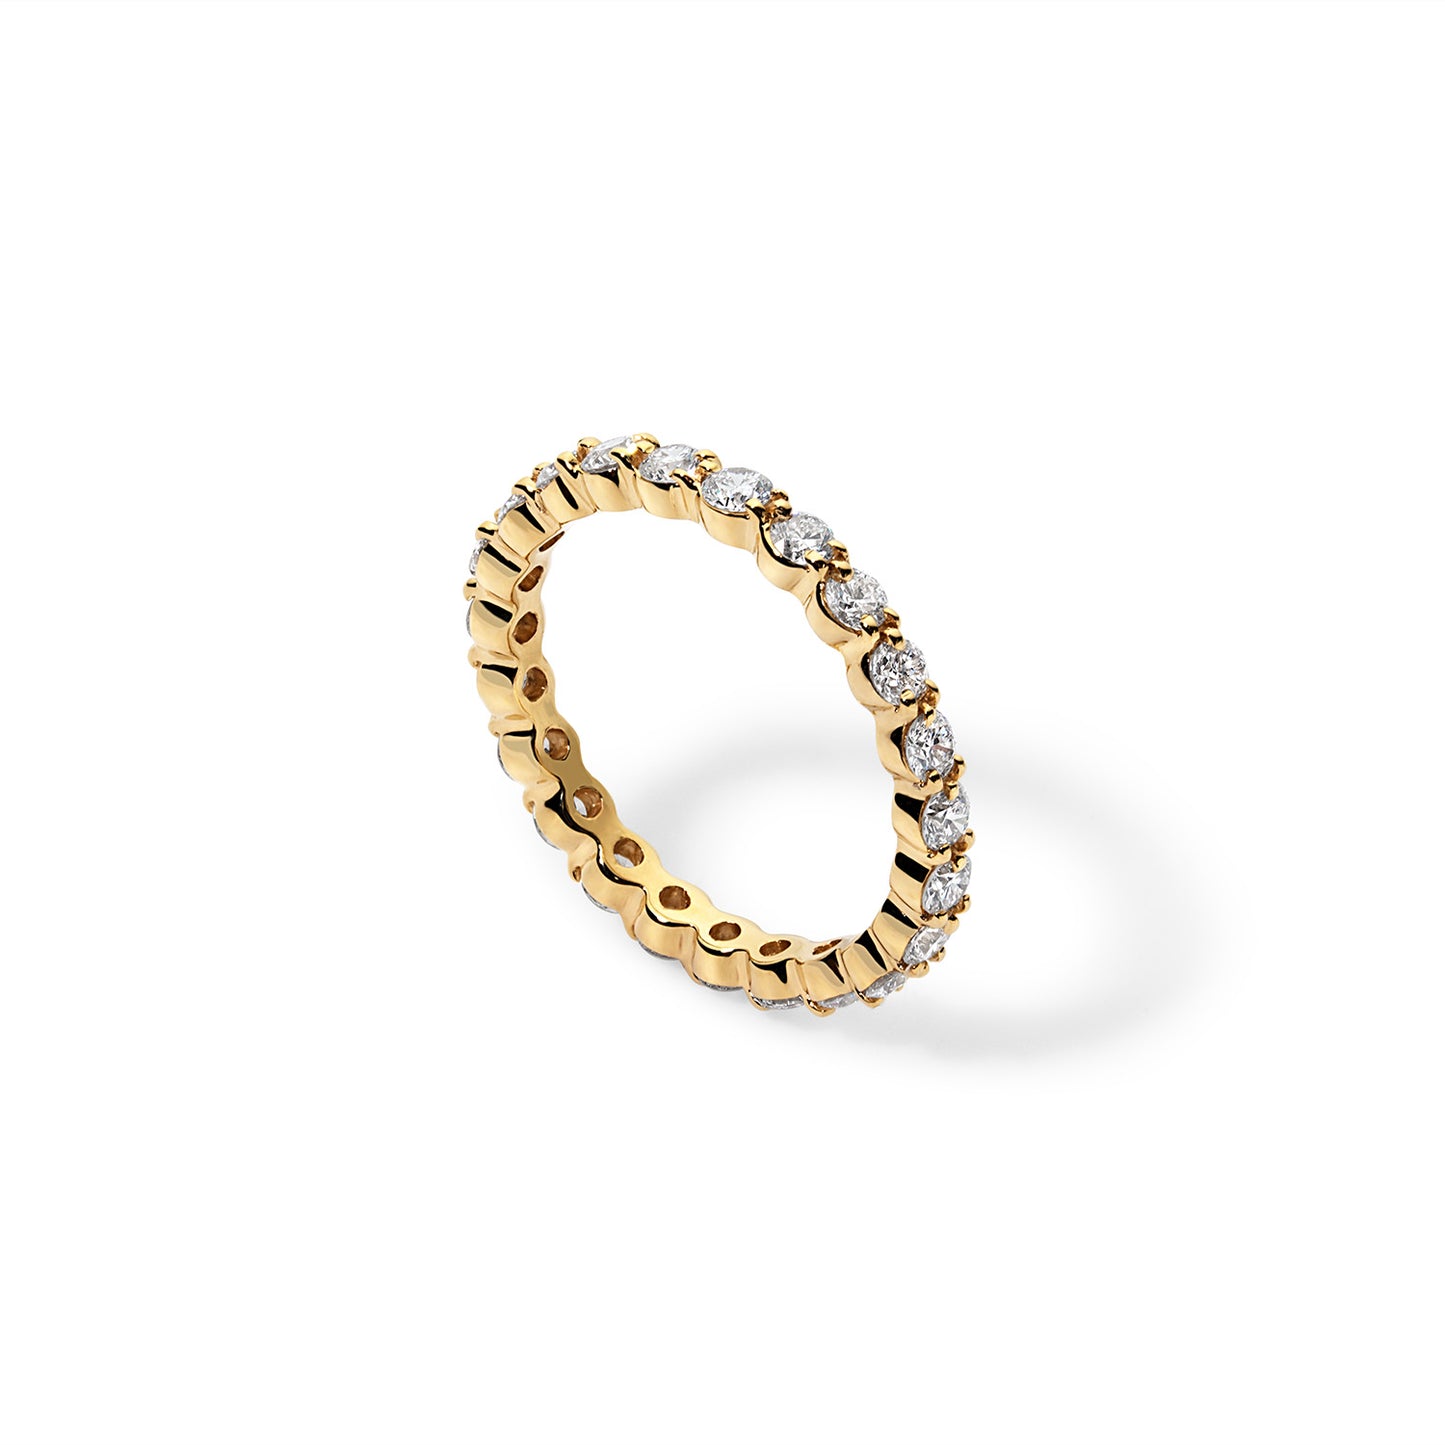 Gold stackable diamond eternity band from the Pretty Ring Collection by Jillian Abboud, offering versatility with multiple metal and stone options. Made to order in New York.